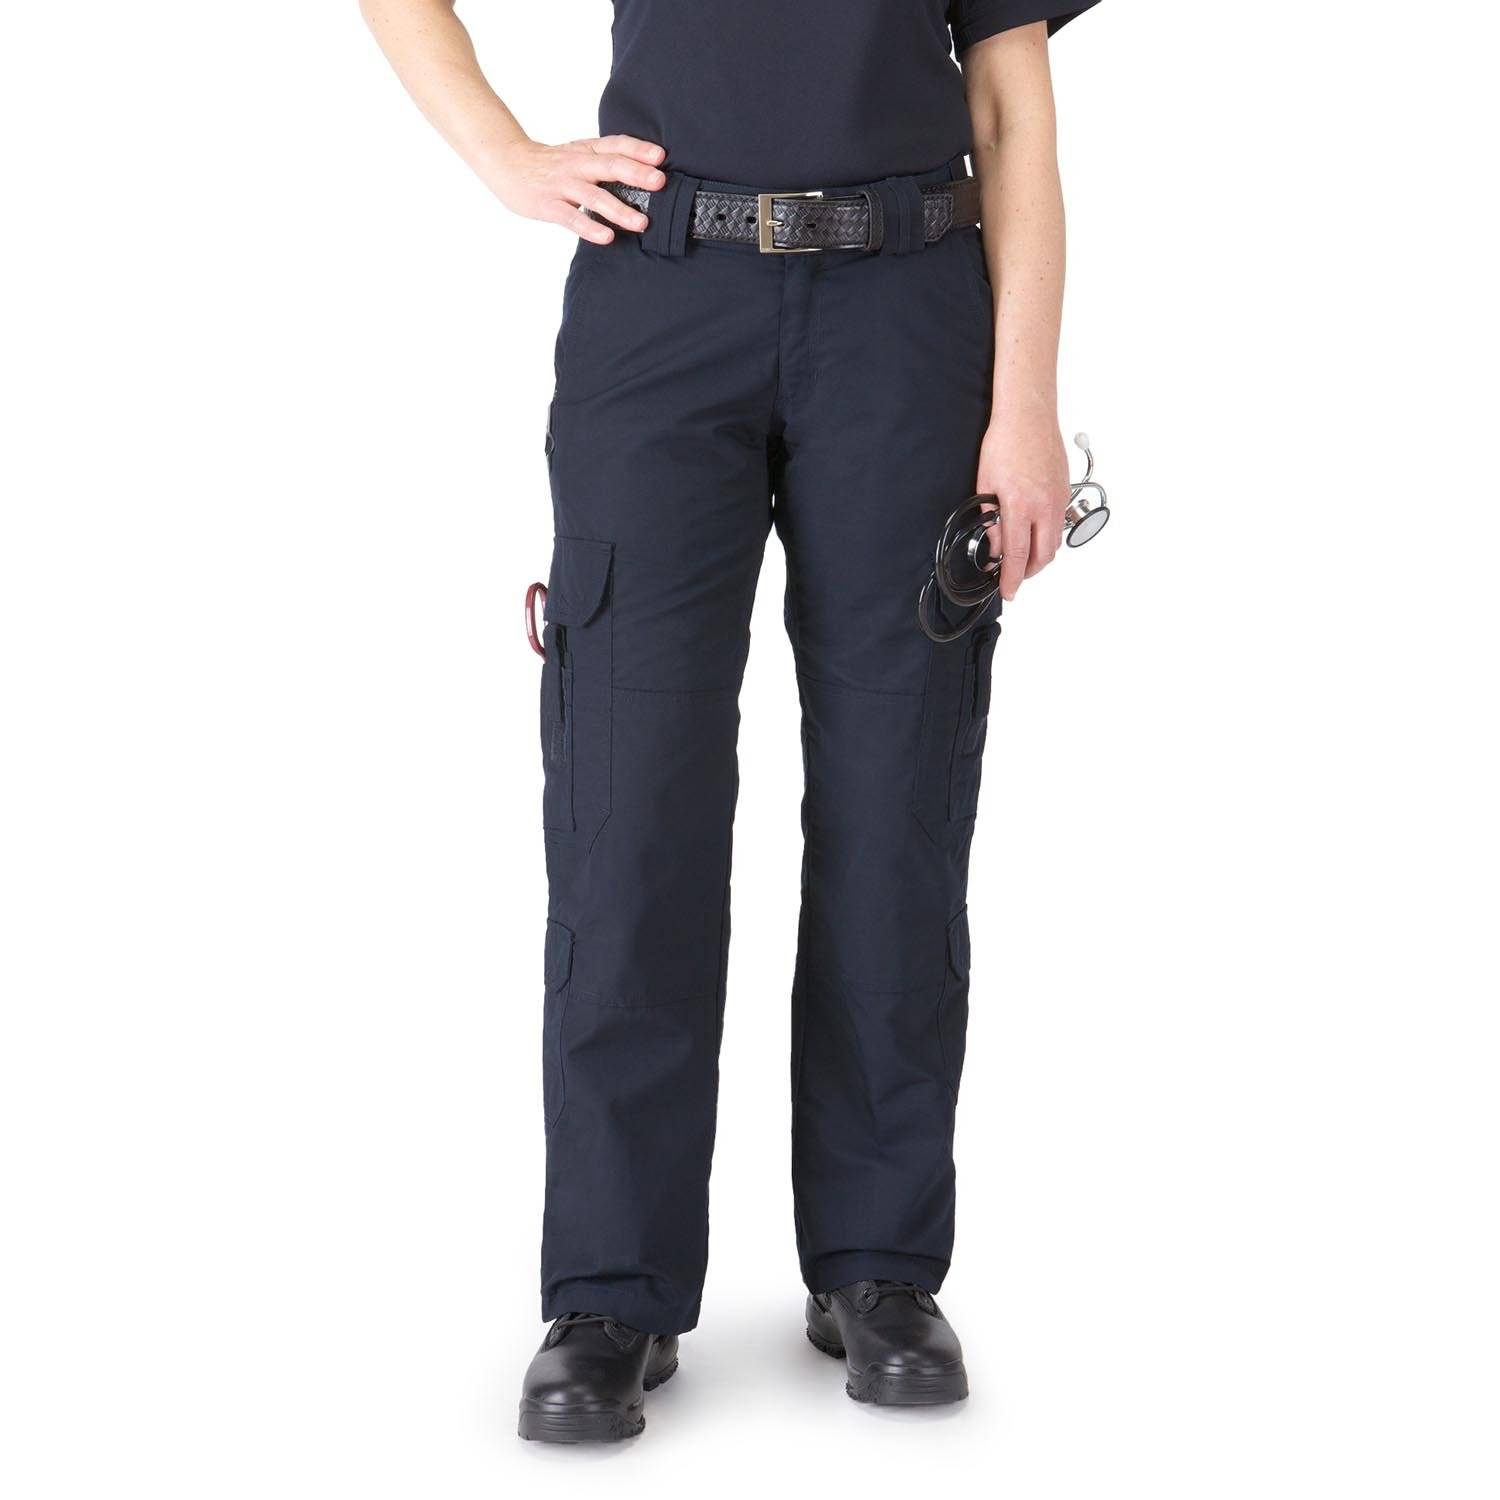 Abby Tight: High-Performance Tactical Leggings, 5.11 Tactical®